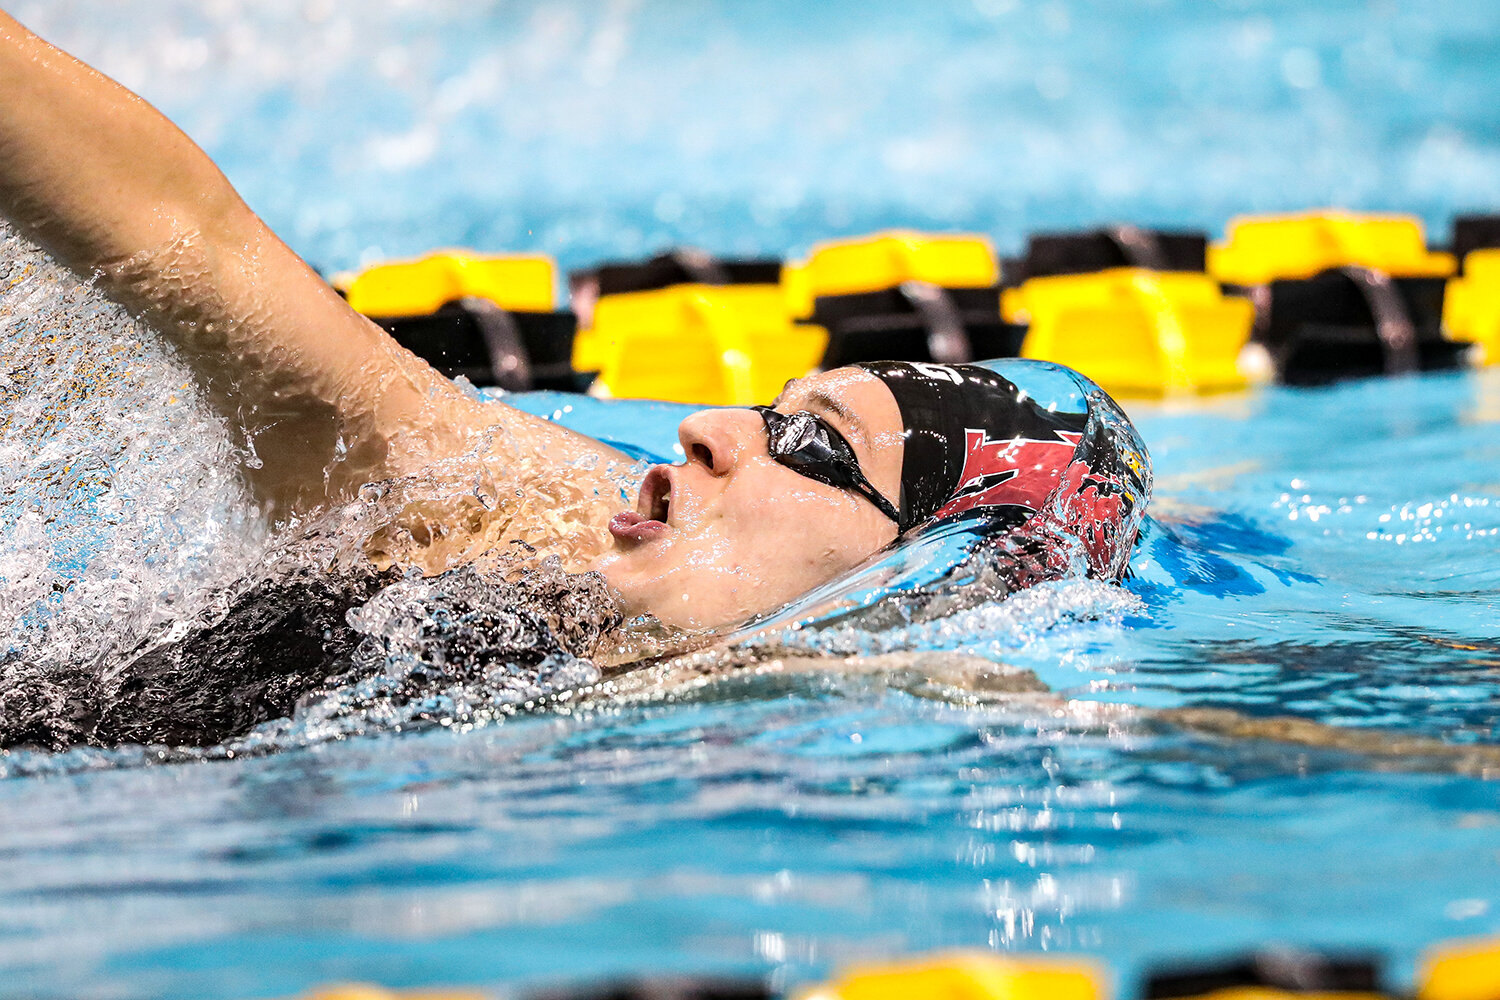  Tereza Grusova swims the consolation final in the 200 yard backstroke during the Big Ten Women’s Swimming and Diving Championships at the Campus Welfare and Recreation Center in Iowa City, IA on Saturday, Feb. 22, 2020.  